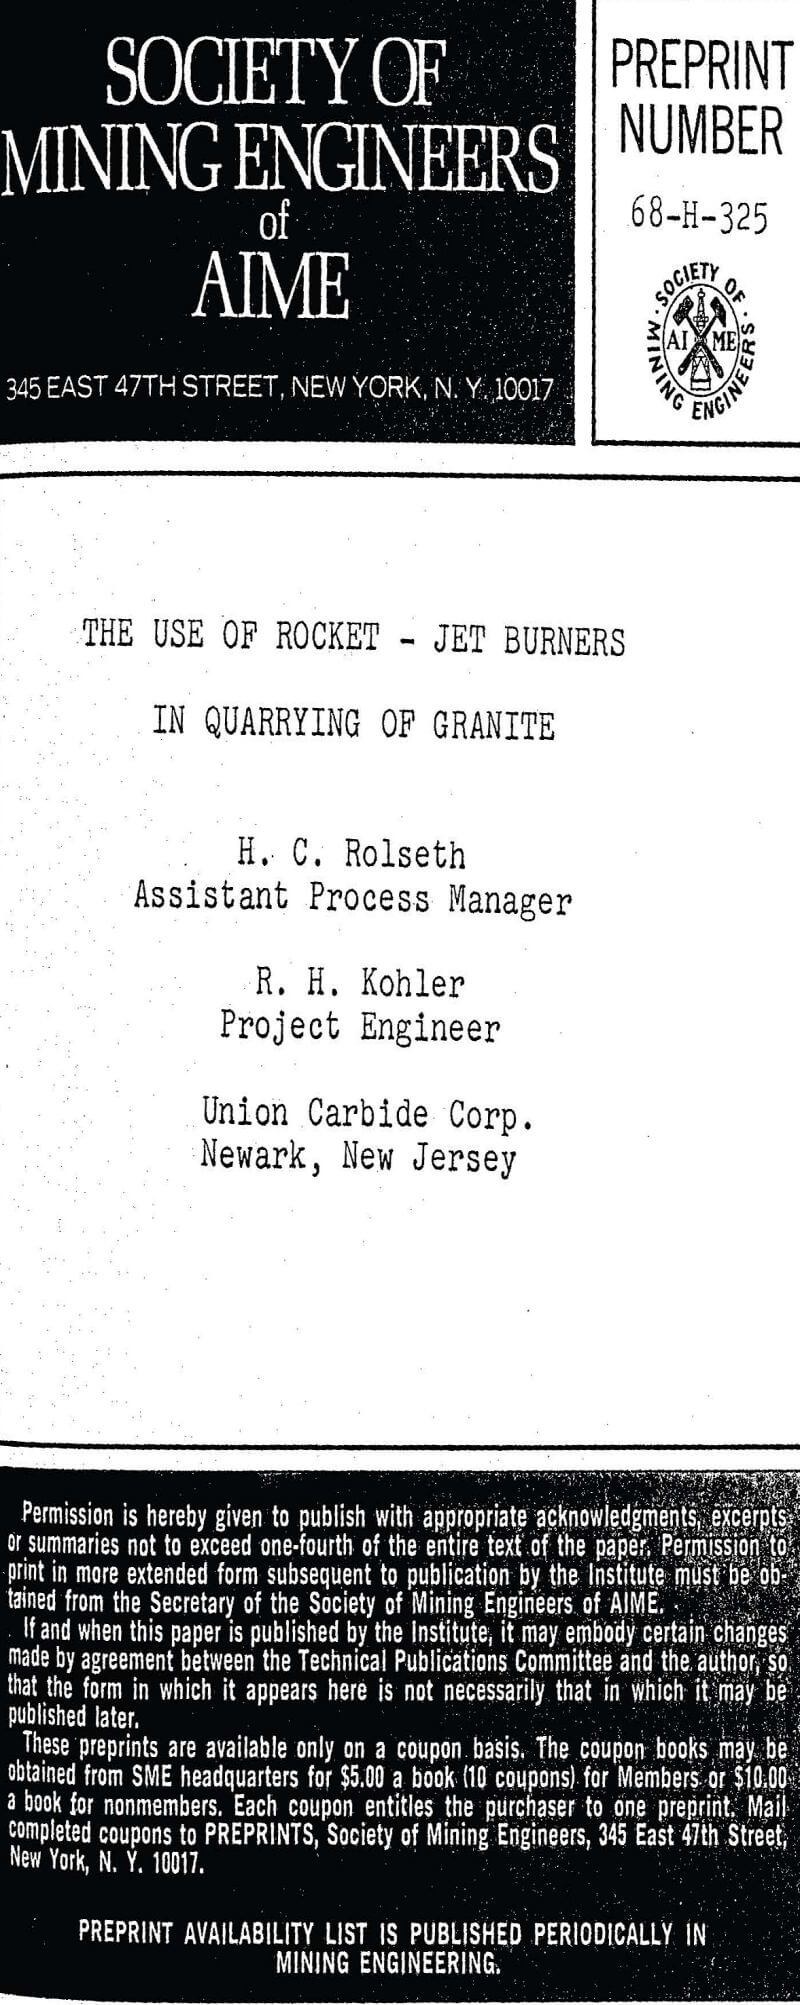 the use of rocket jet burners in quarrying of granite